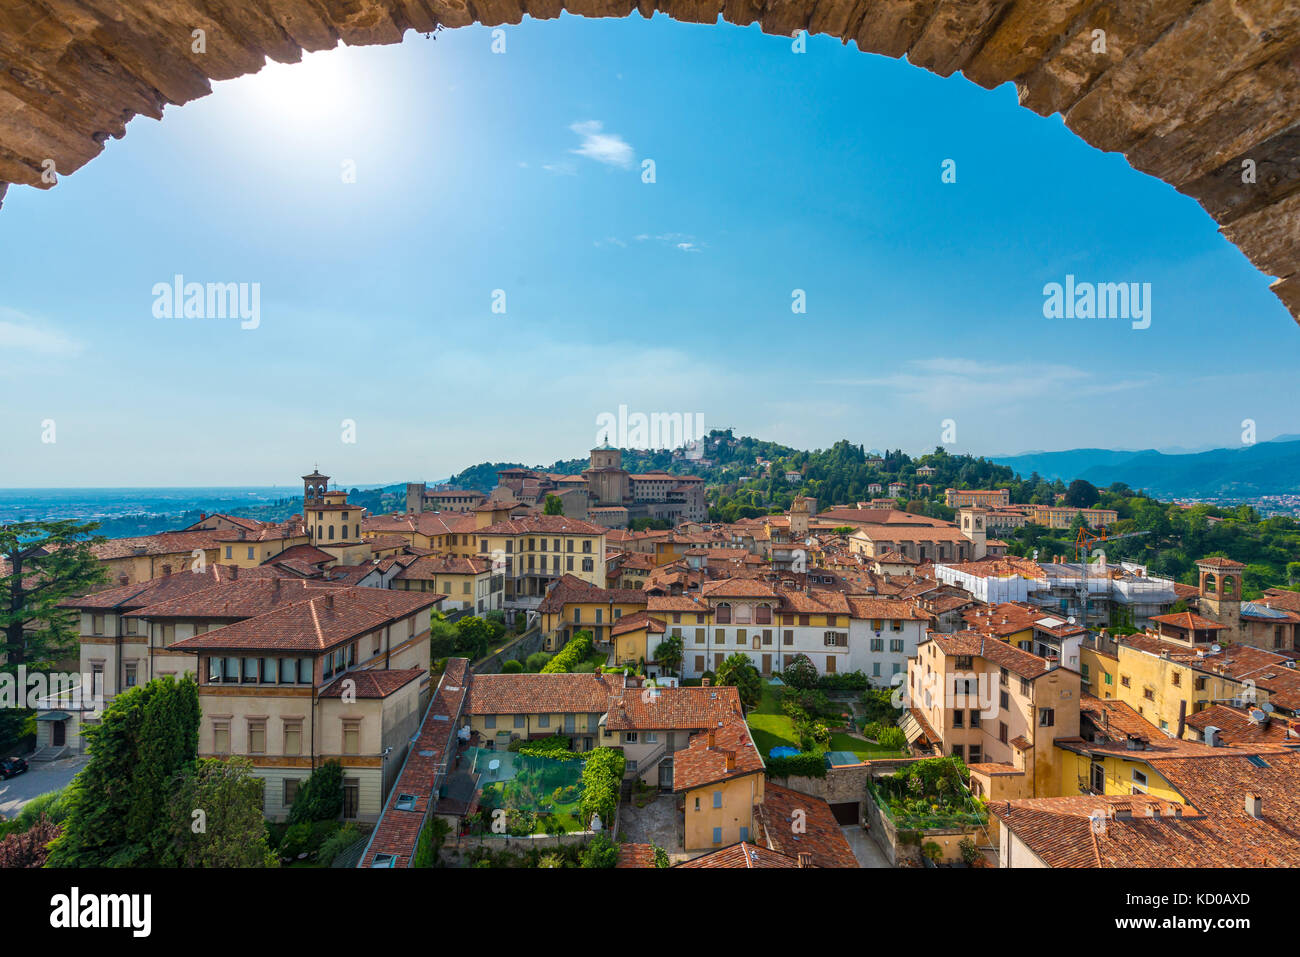 View of Bergamo from the old town tower Campanone Torre Civica, Bergamo, Province of Bergamo, Lombardy, Italy Stock Photo